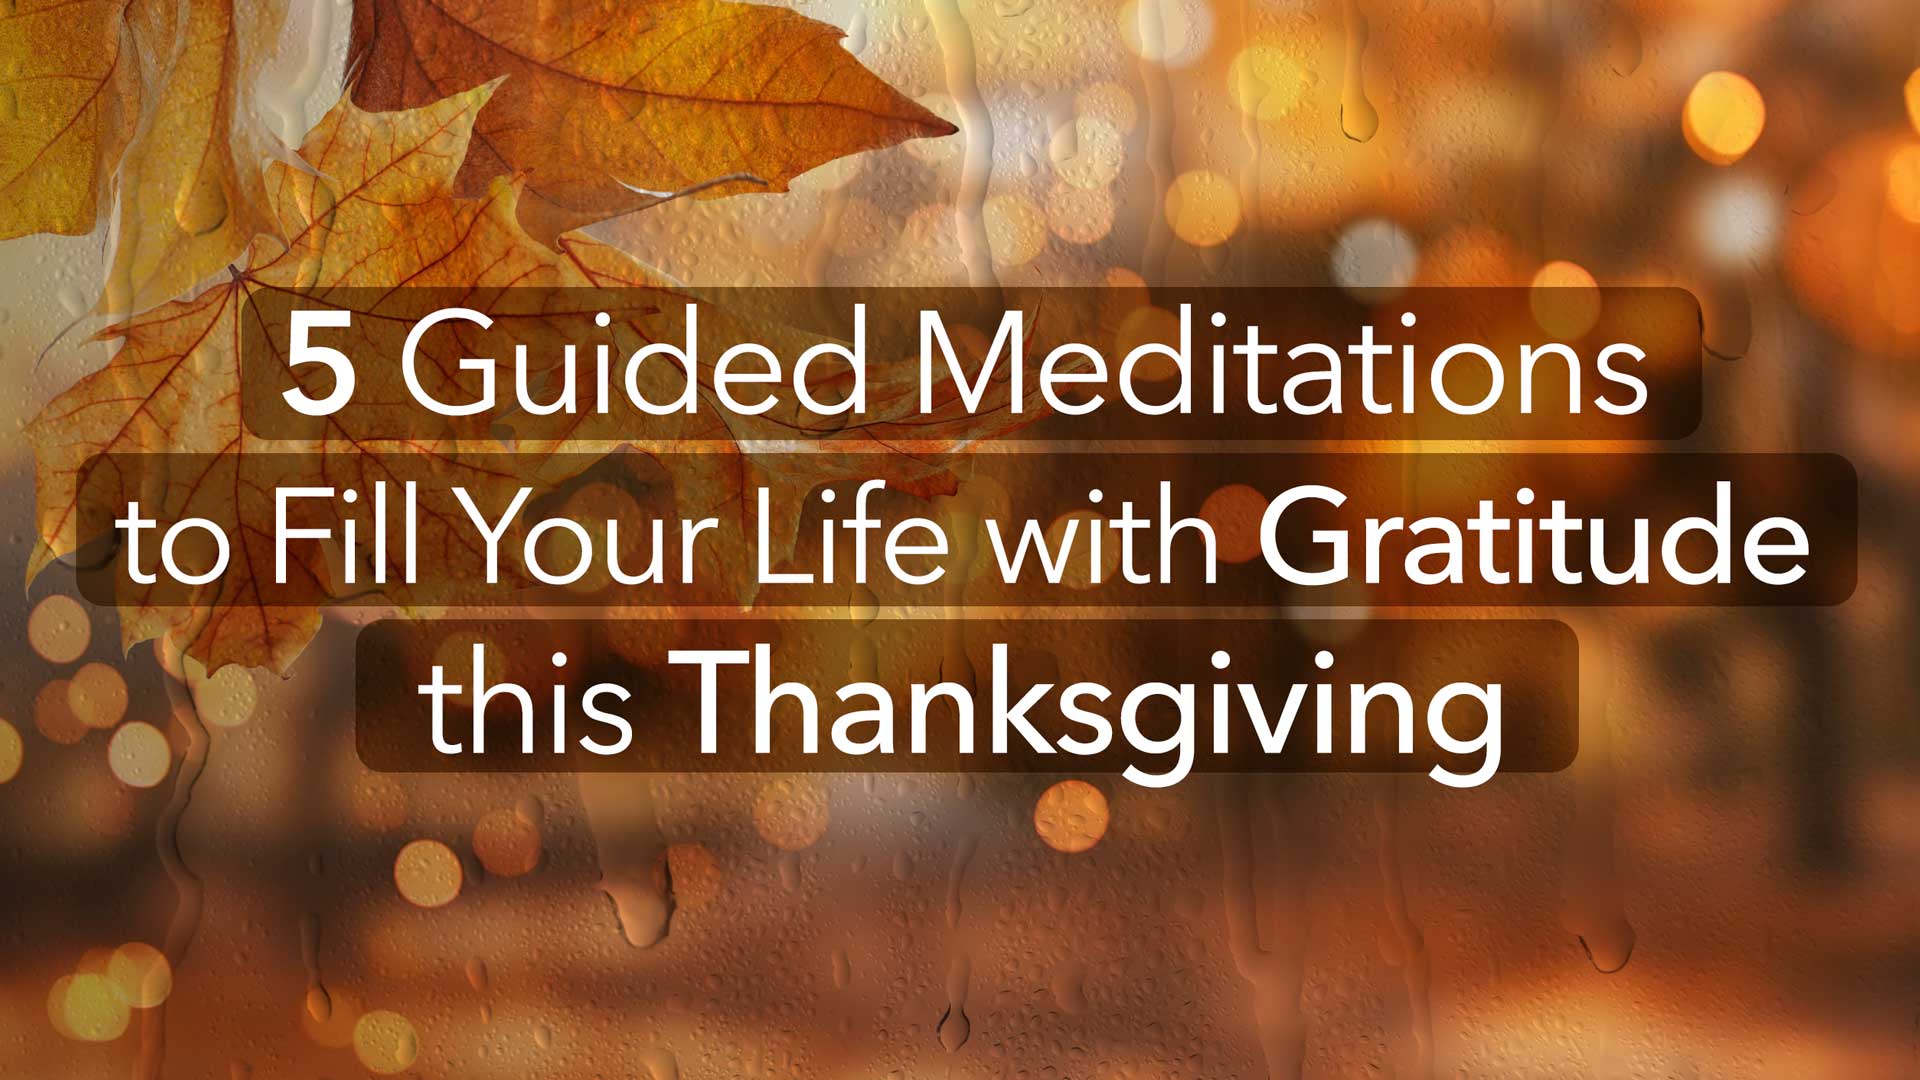 5 Guided Meditations to Fill Your Life with Gratitude this Thanksgiving